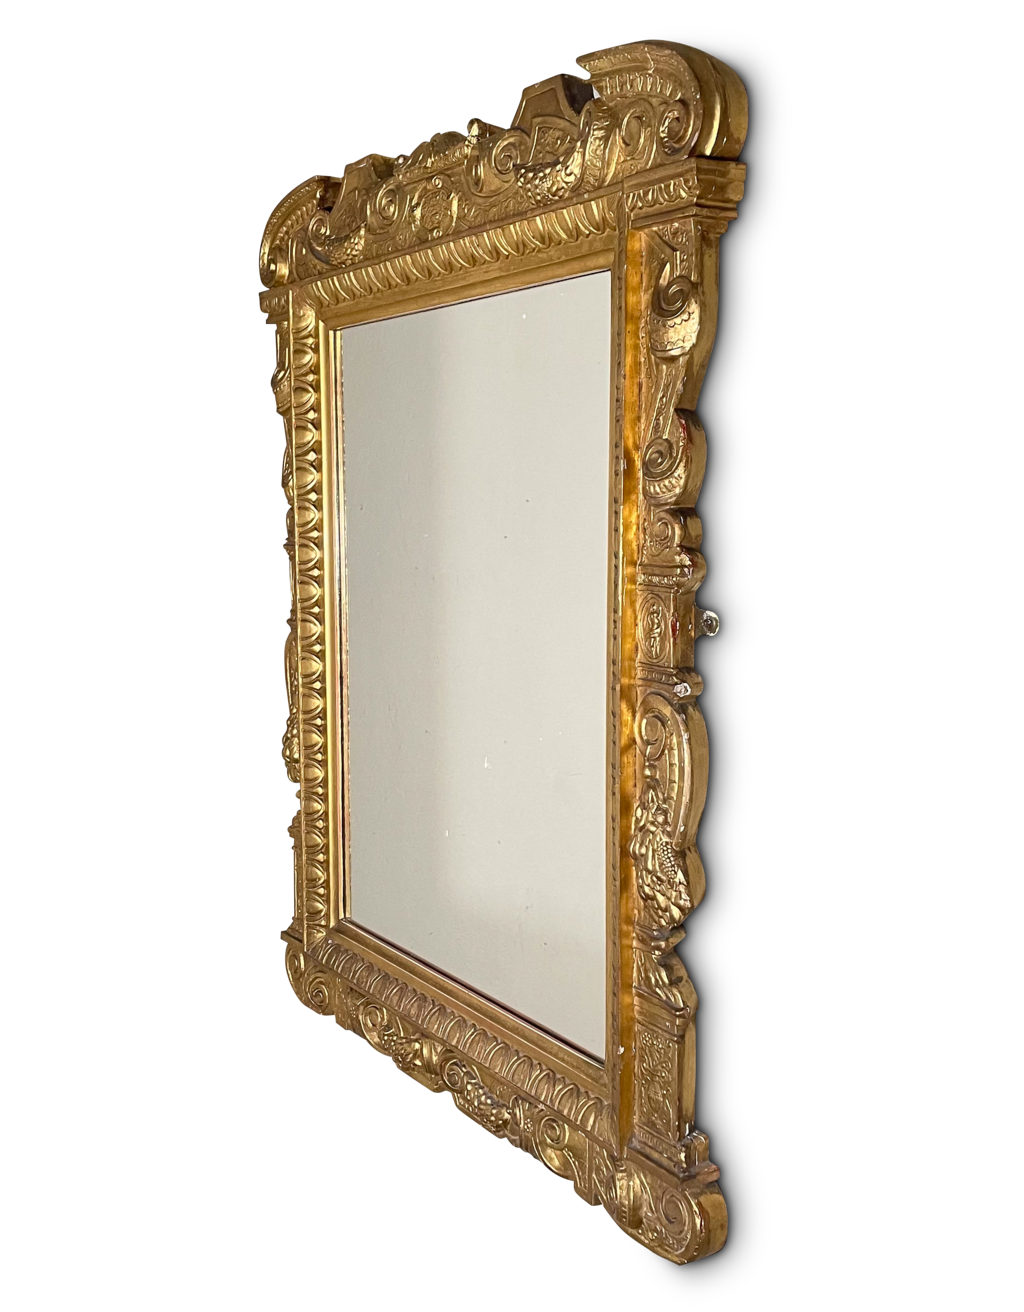 Gilt Wall Mirror with Classical Decoration